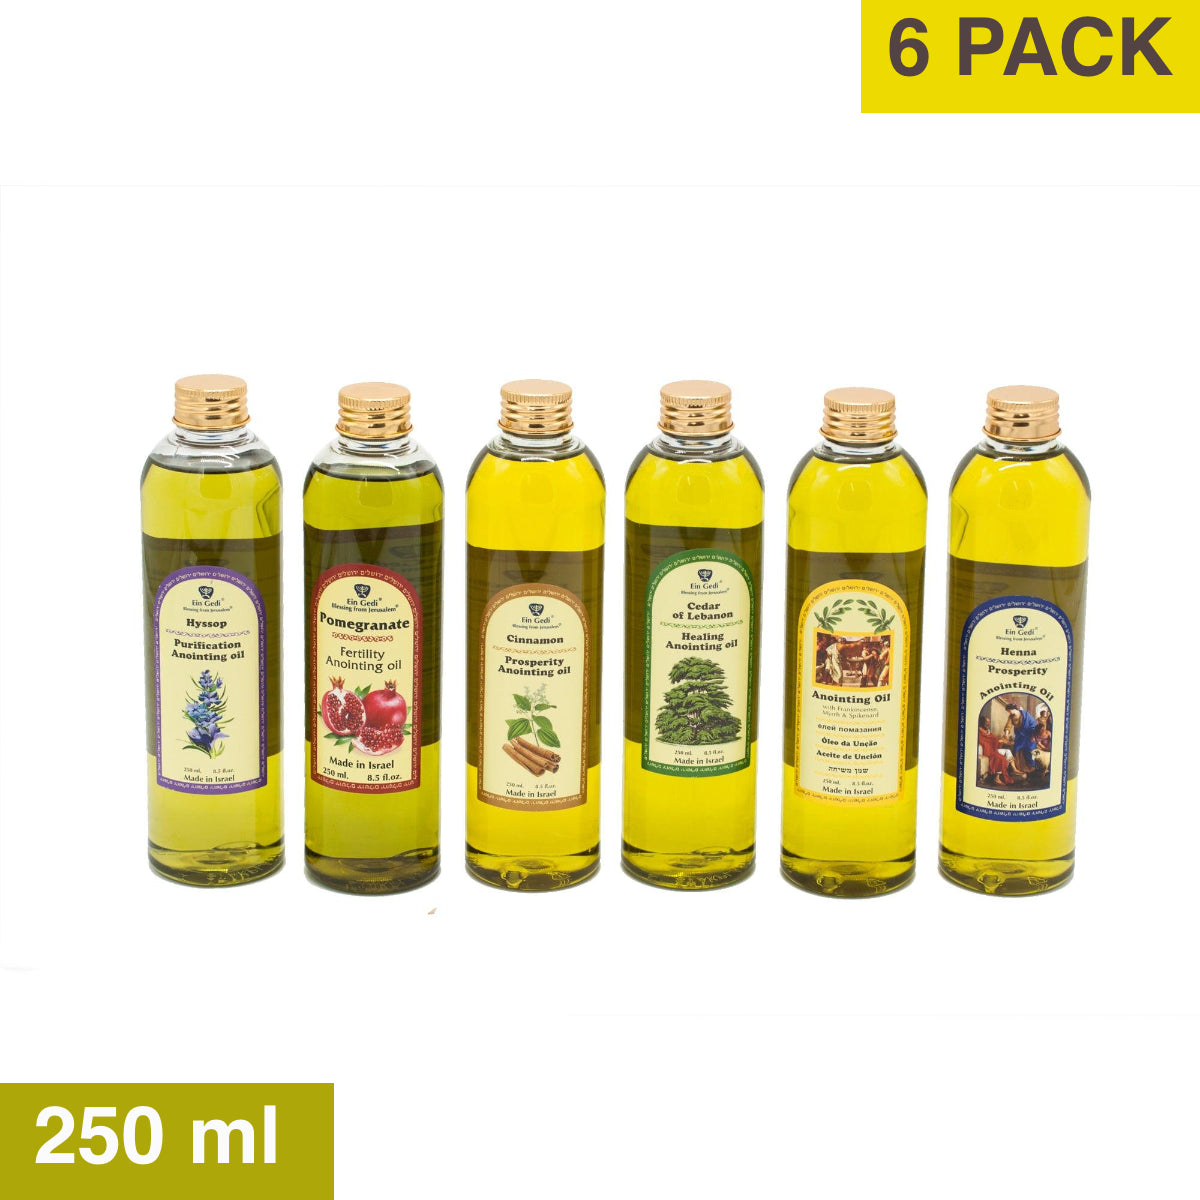 Lot of 6 x Mixed Anointing Oils 250 ml. - 8.5 fl. oz. From the Holyland Jerusalem